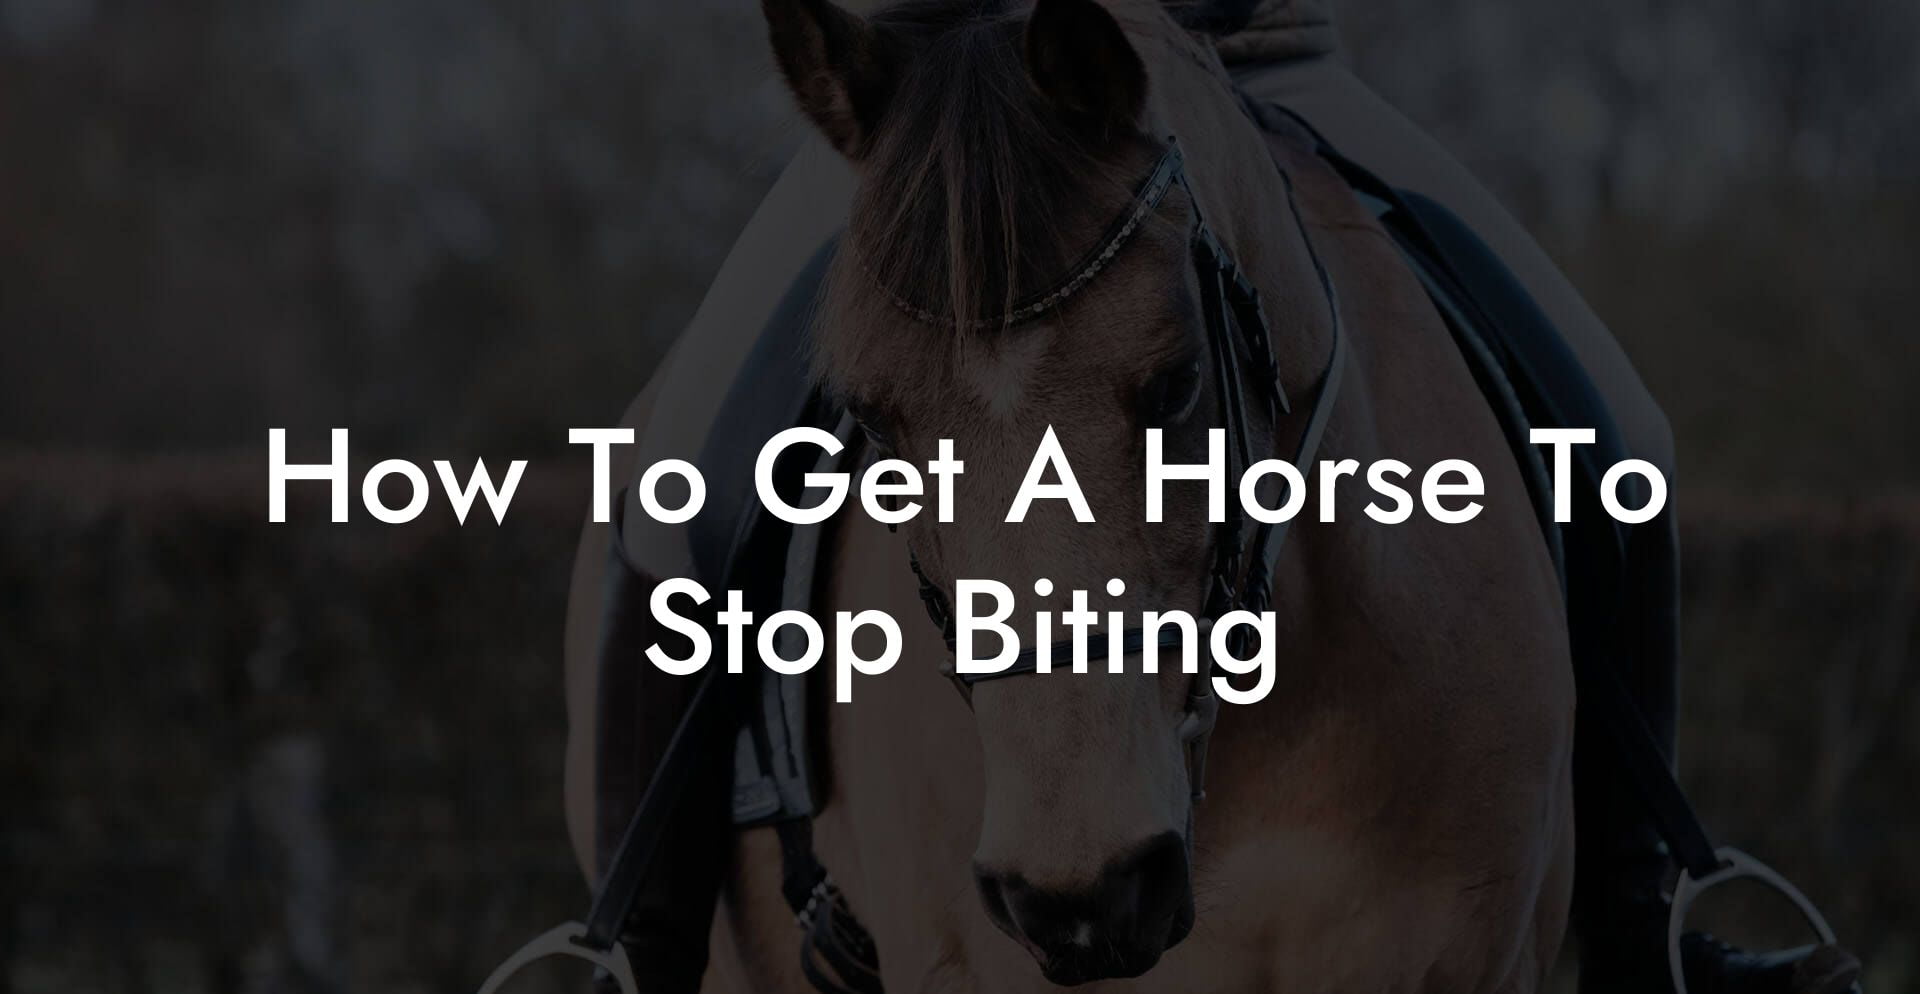 How To Get A Horse To Stop Biting